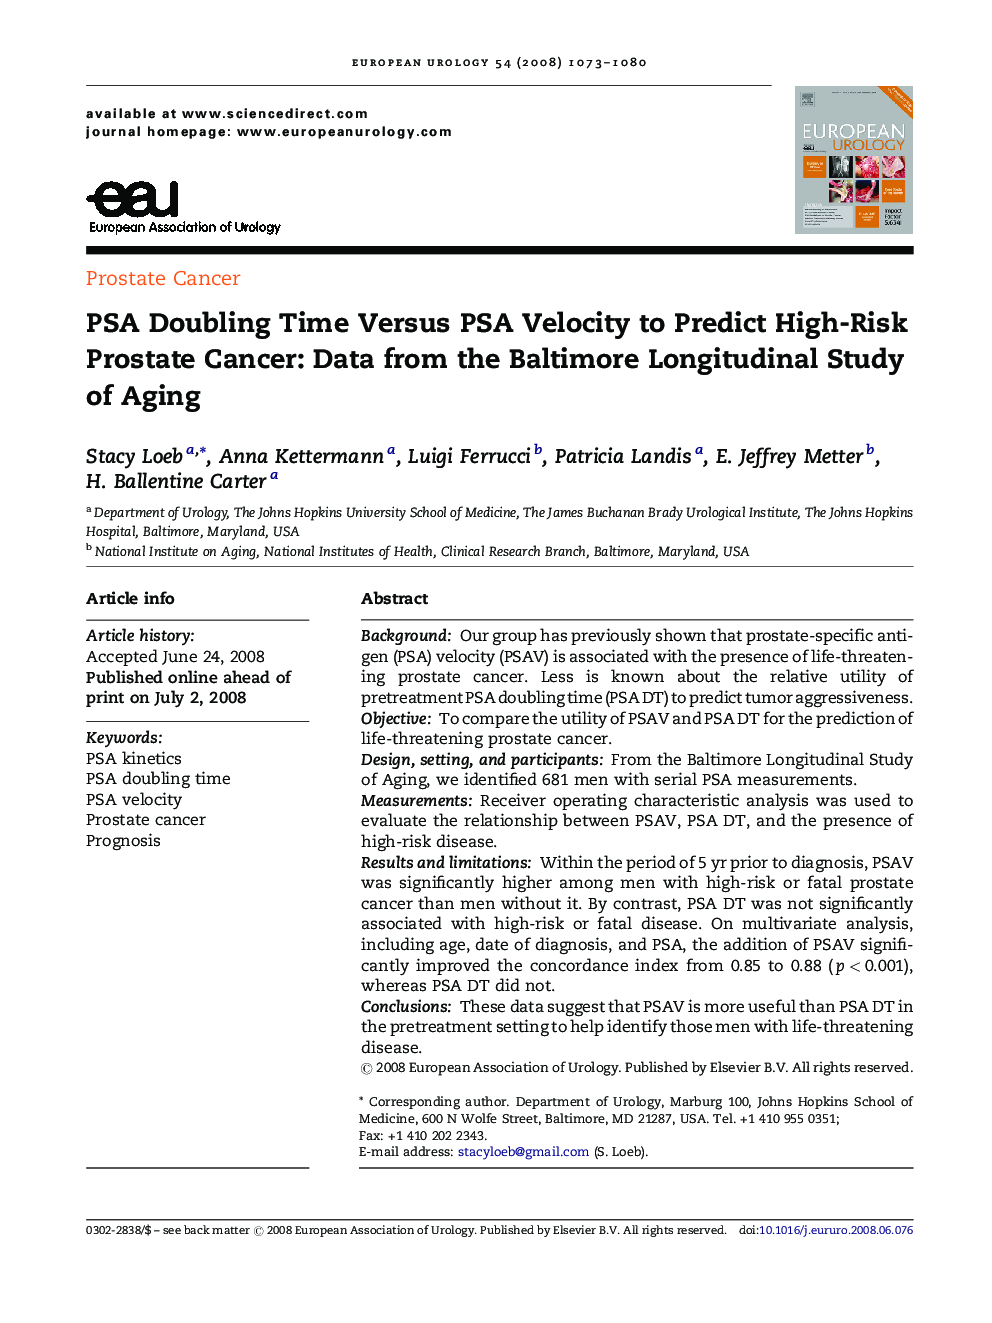 PSA Doubling Time Versus PSA Velocity to Predict High-Risk Prostate Cancer: Data from the Baltimore Longitudinal Study of Aging